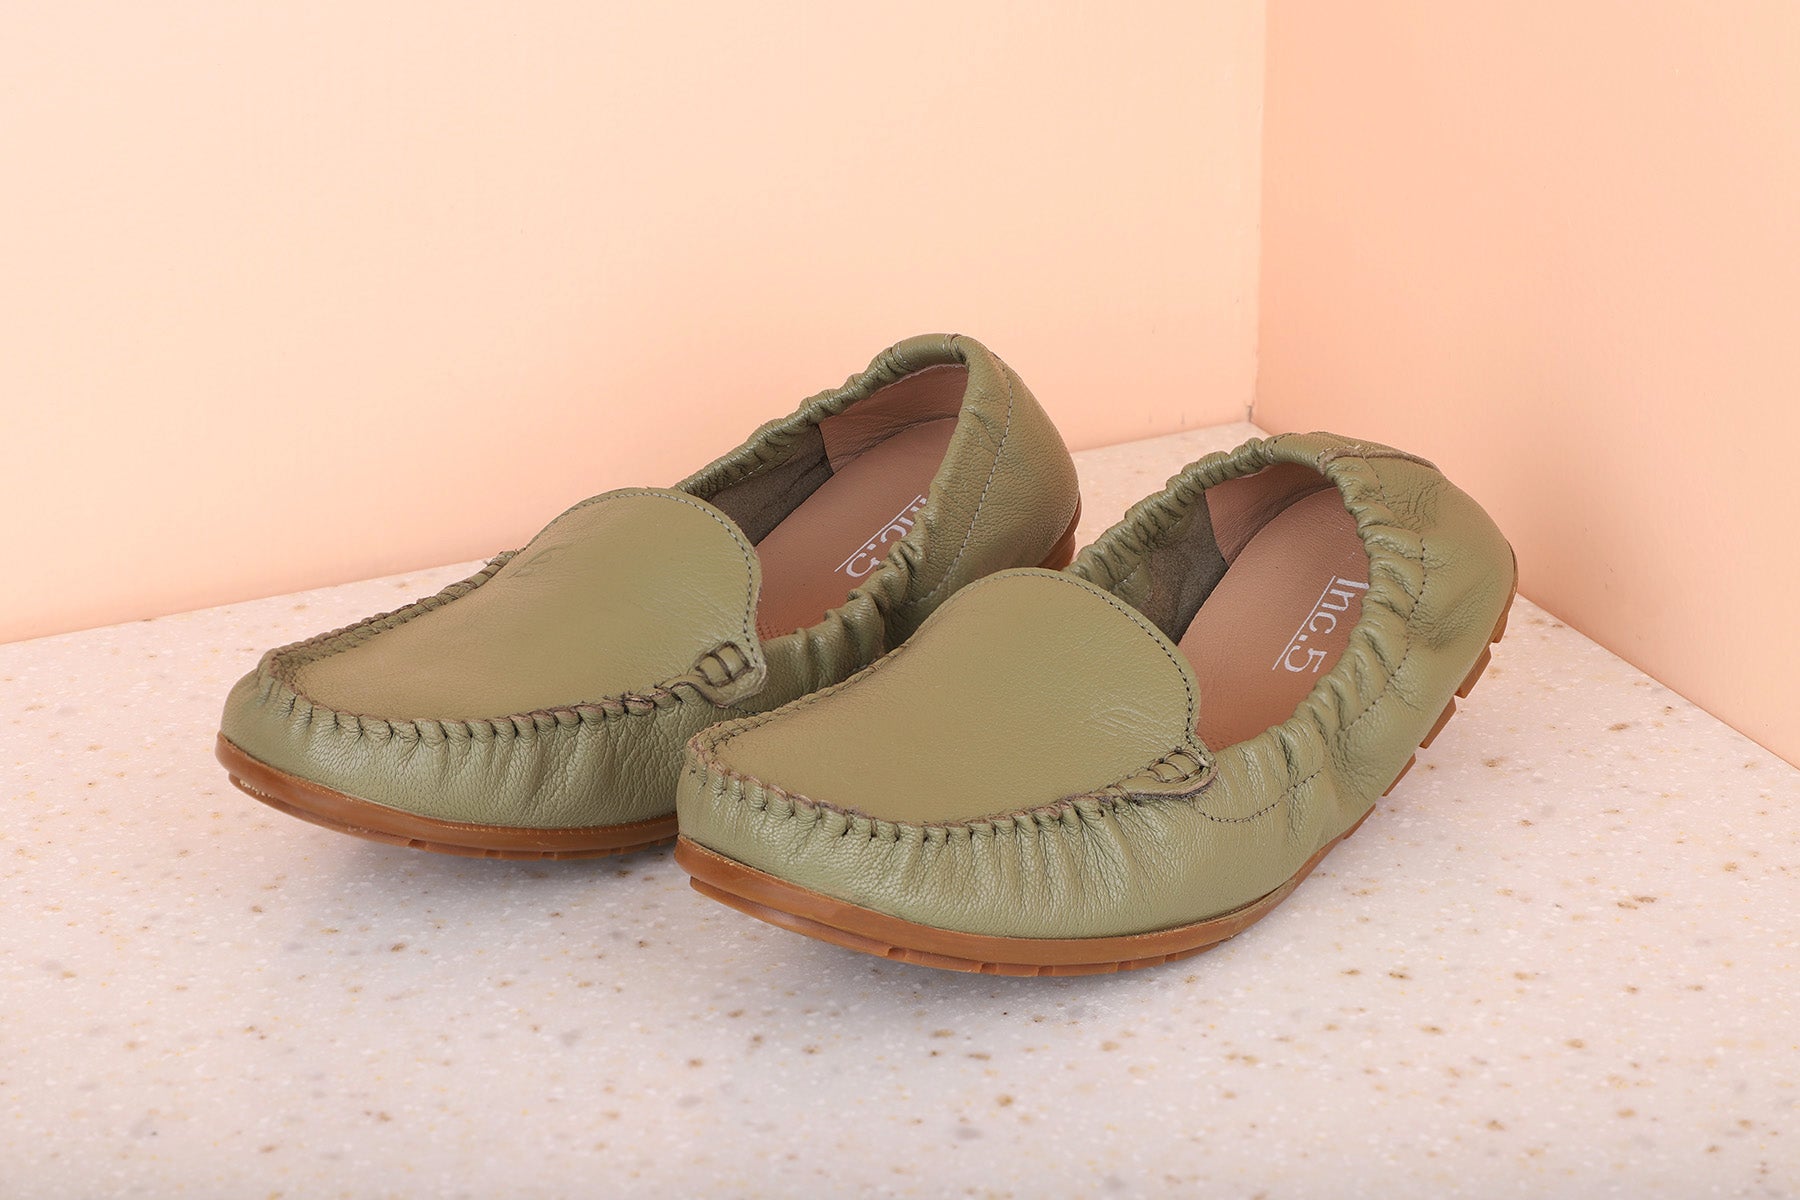 LEATHER BALLERINA-Women's Moccasin-Inc5 Shoes